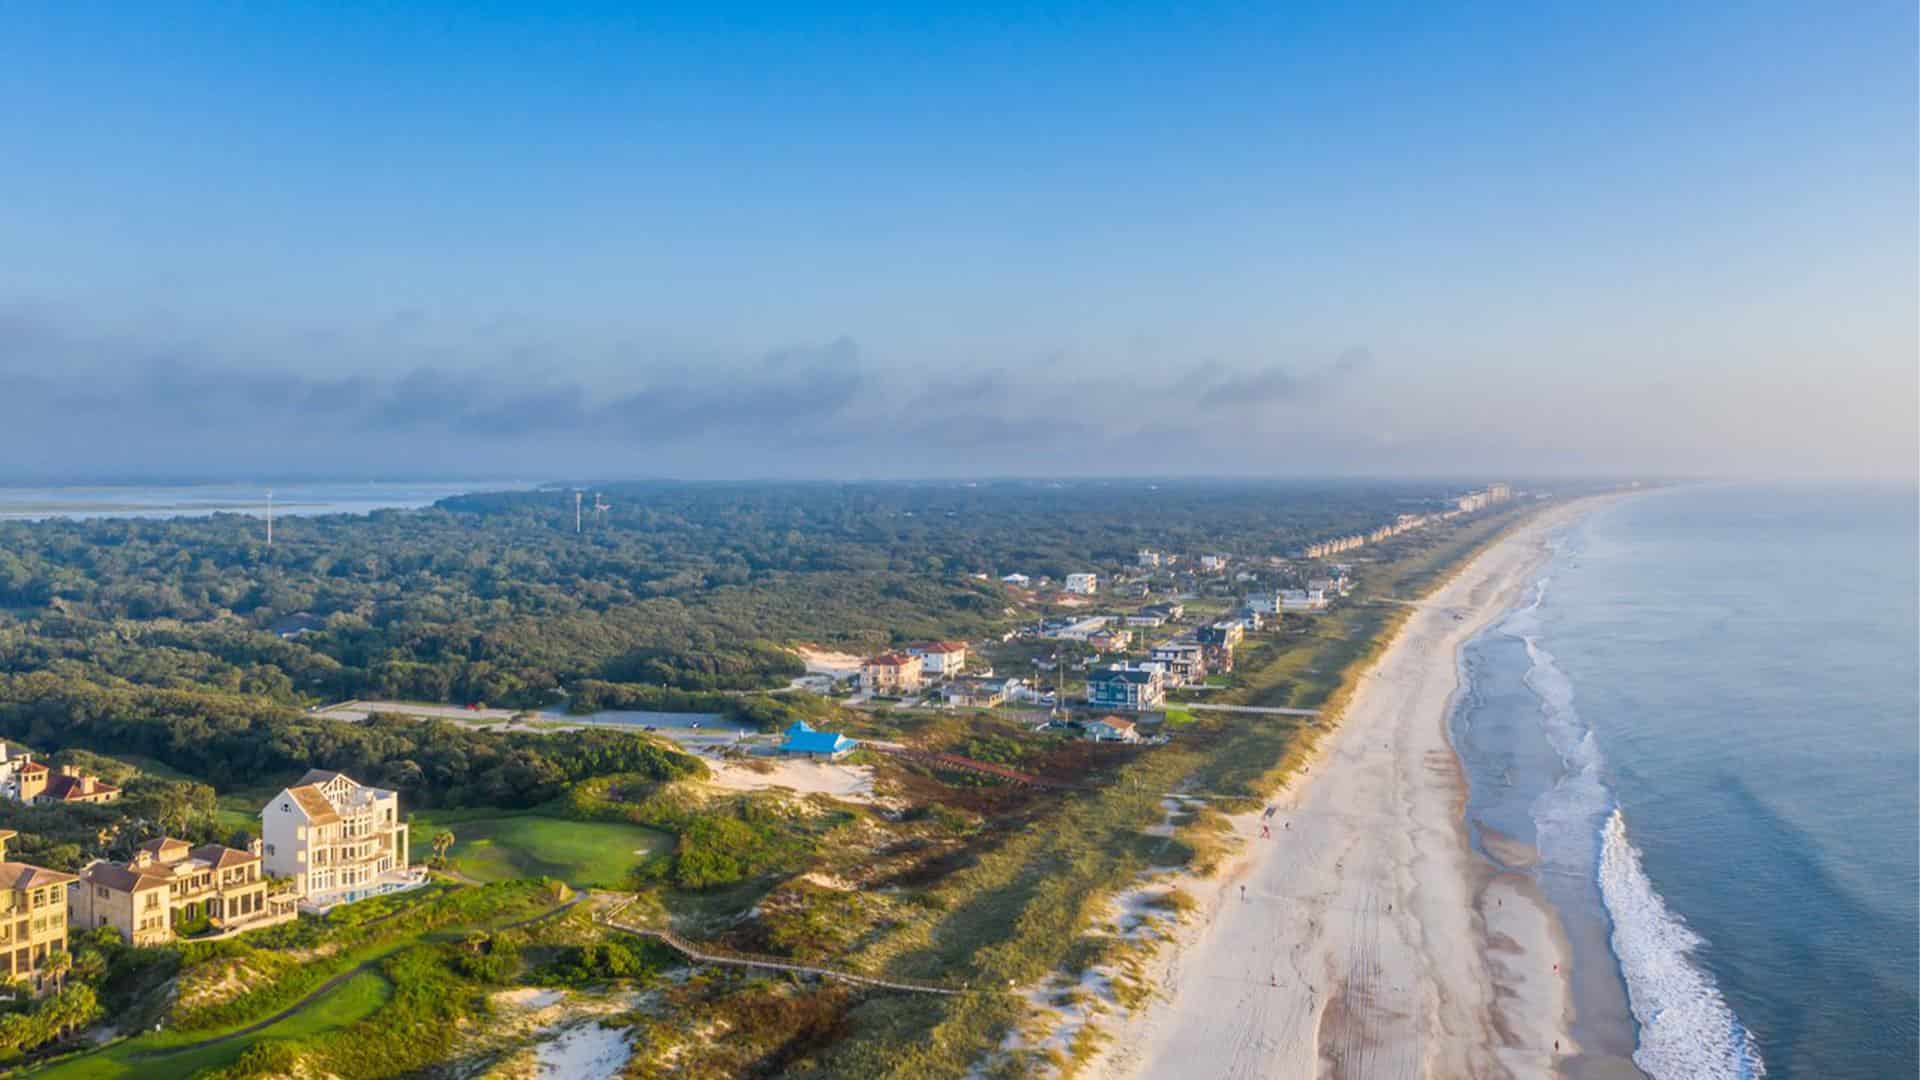 Aerial view of a beach with multiple homes and trees